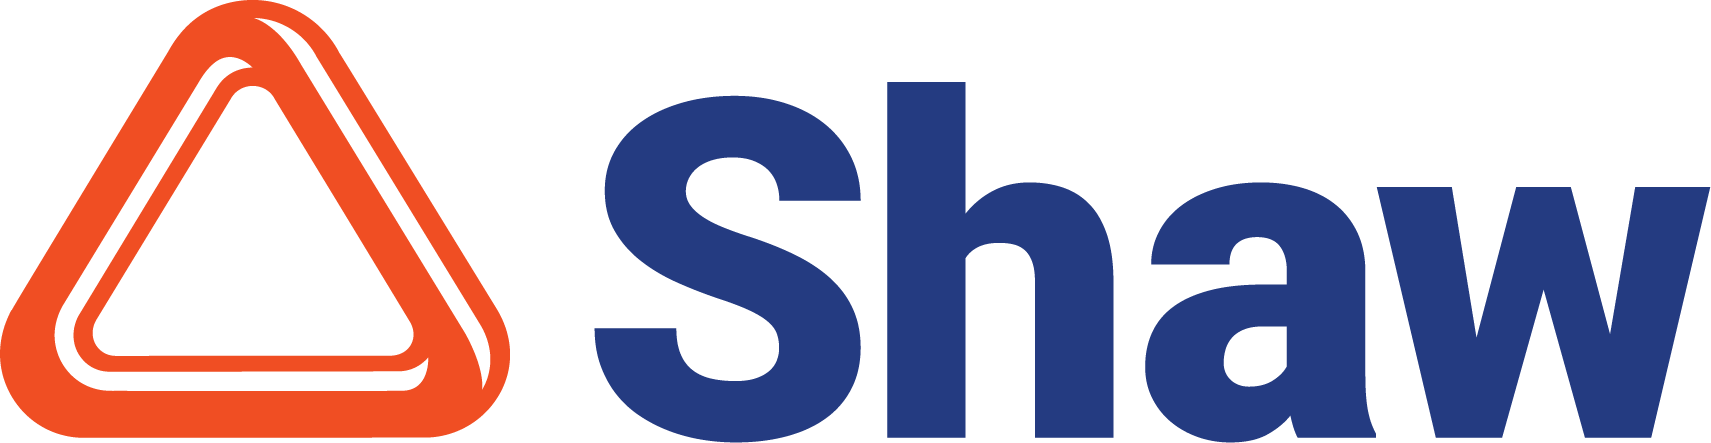 The Shaw Group